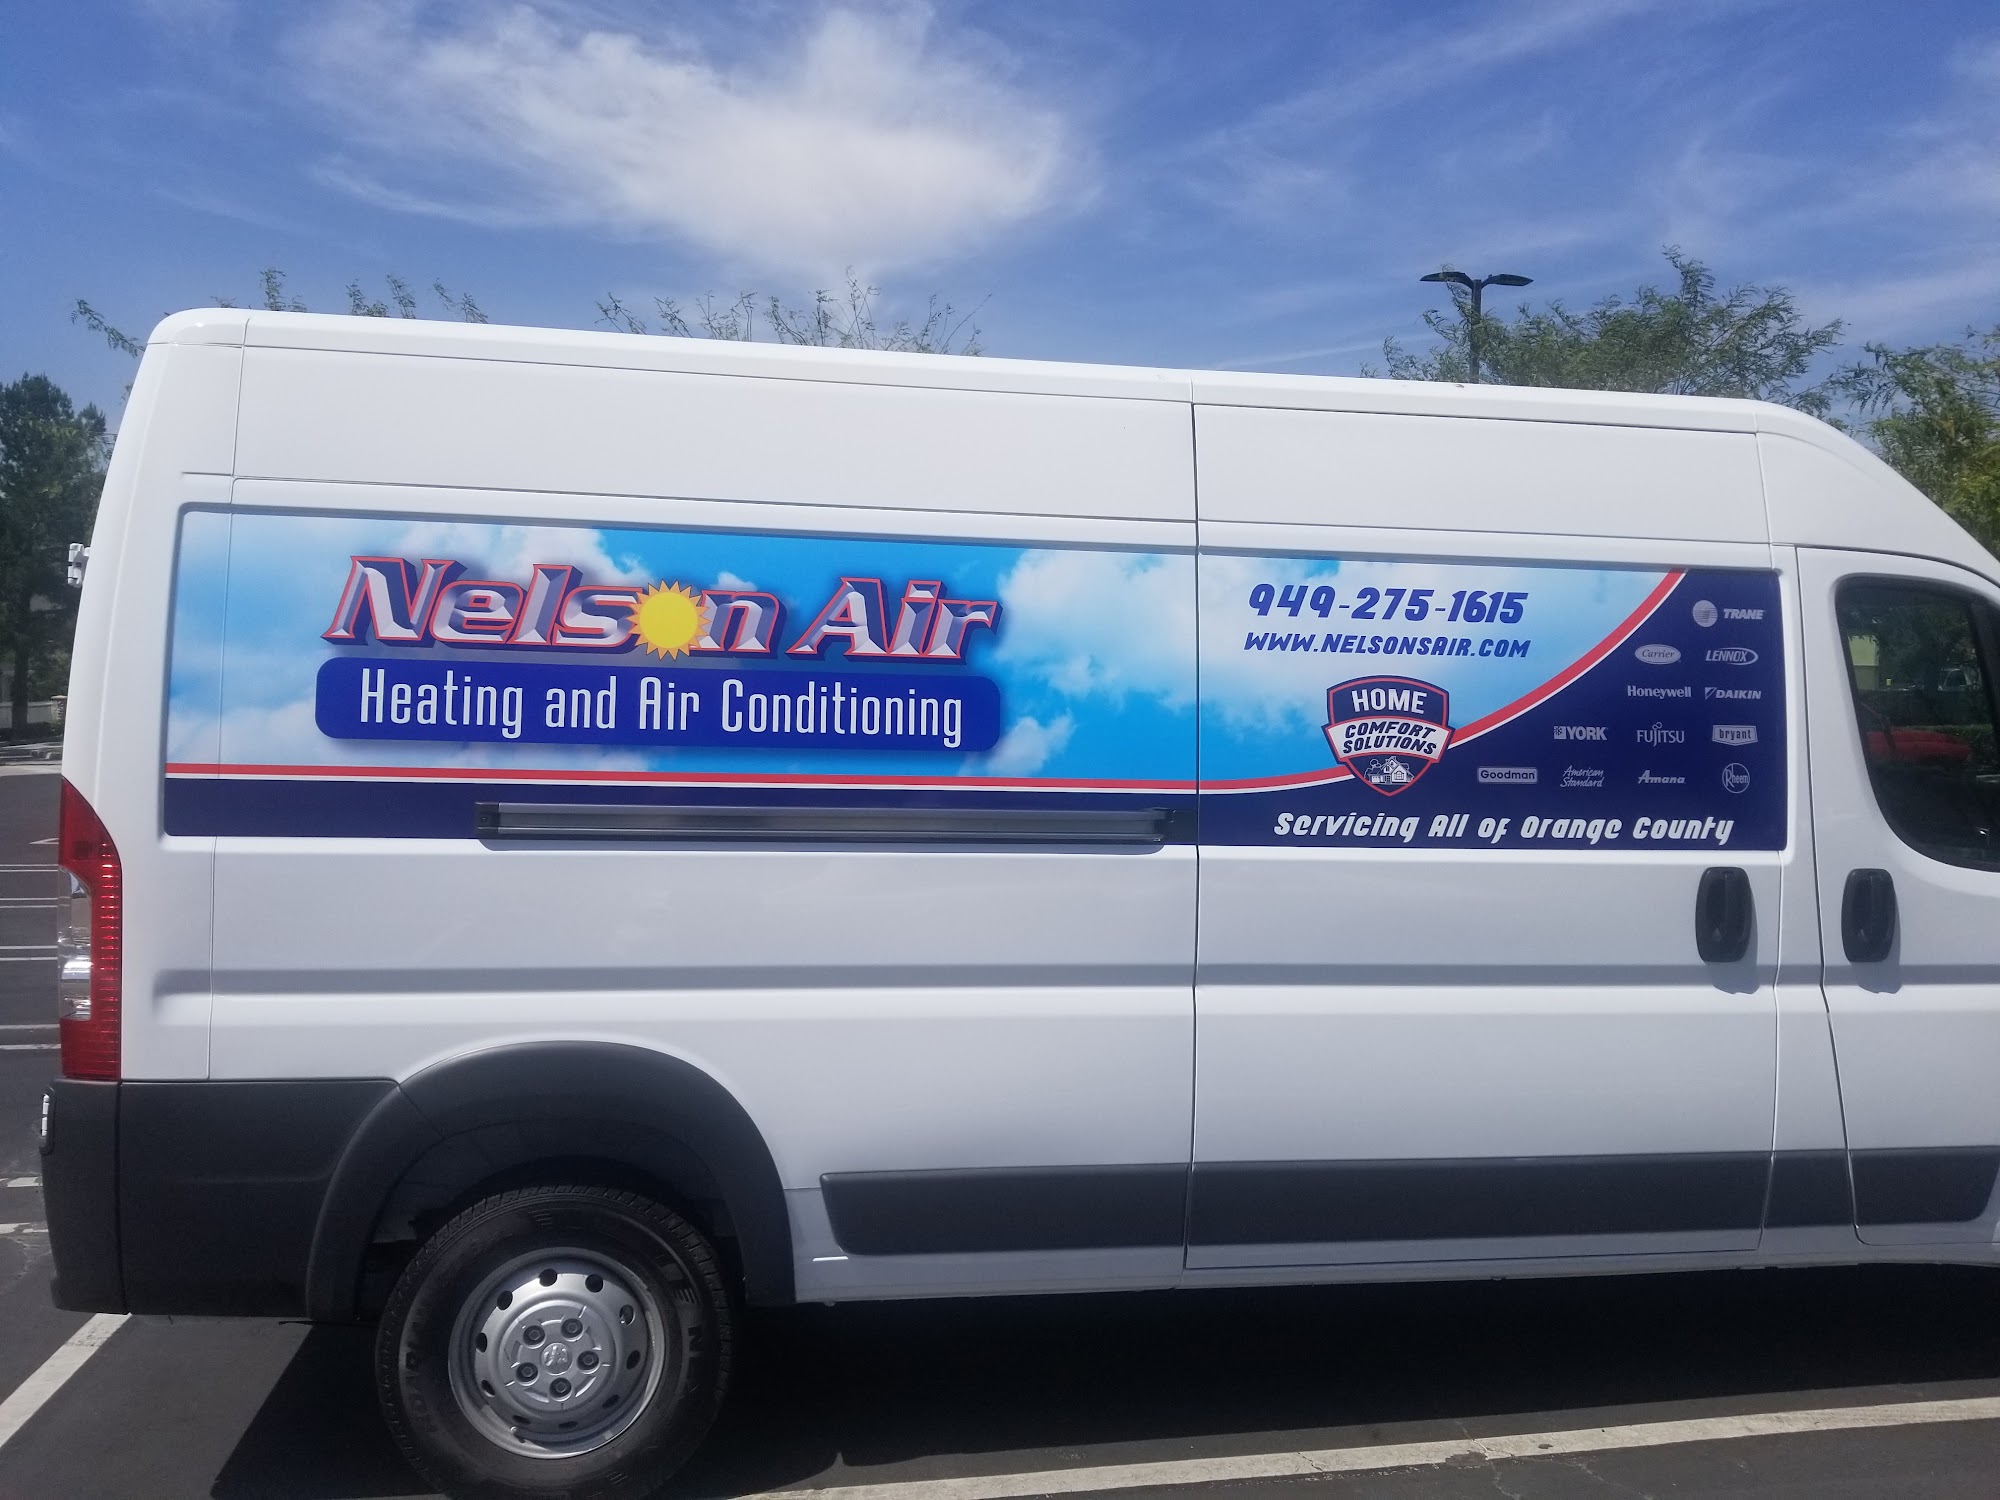 Nelson Air Heating & Air Conditioning